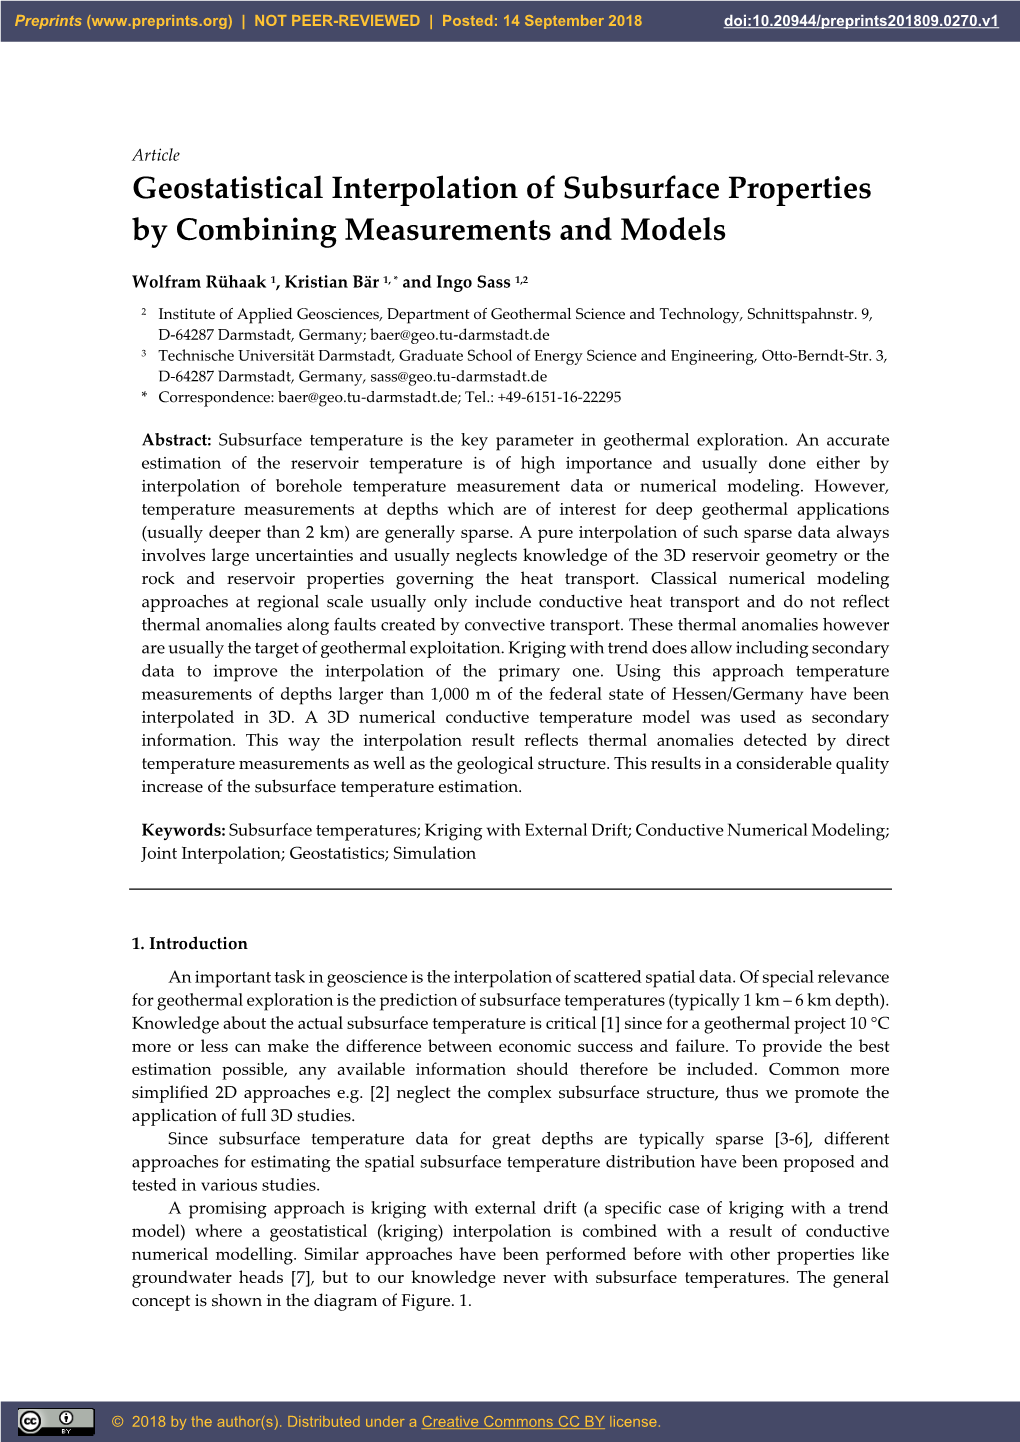 Geostatistical Interpolation of Subsurface Properties by Combining Measurements and Models